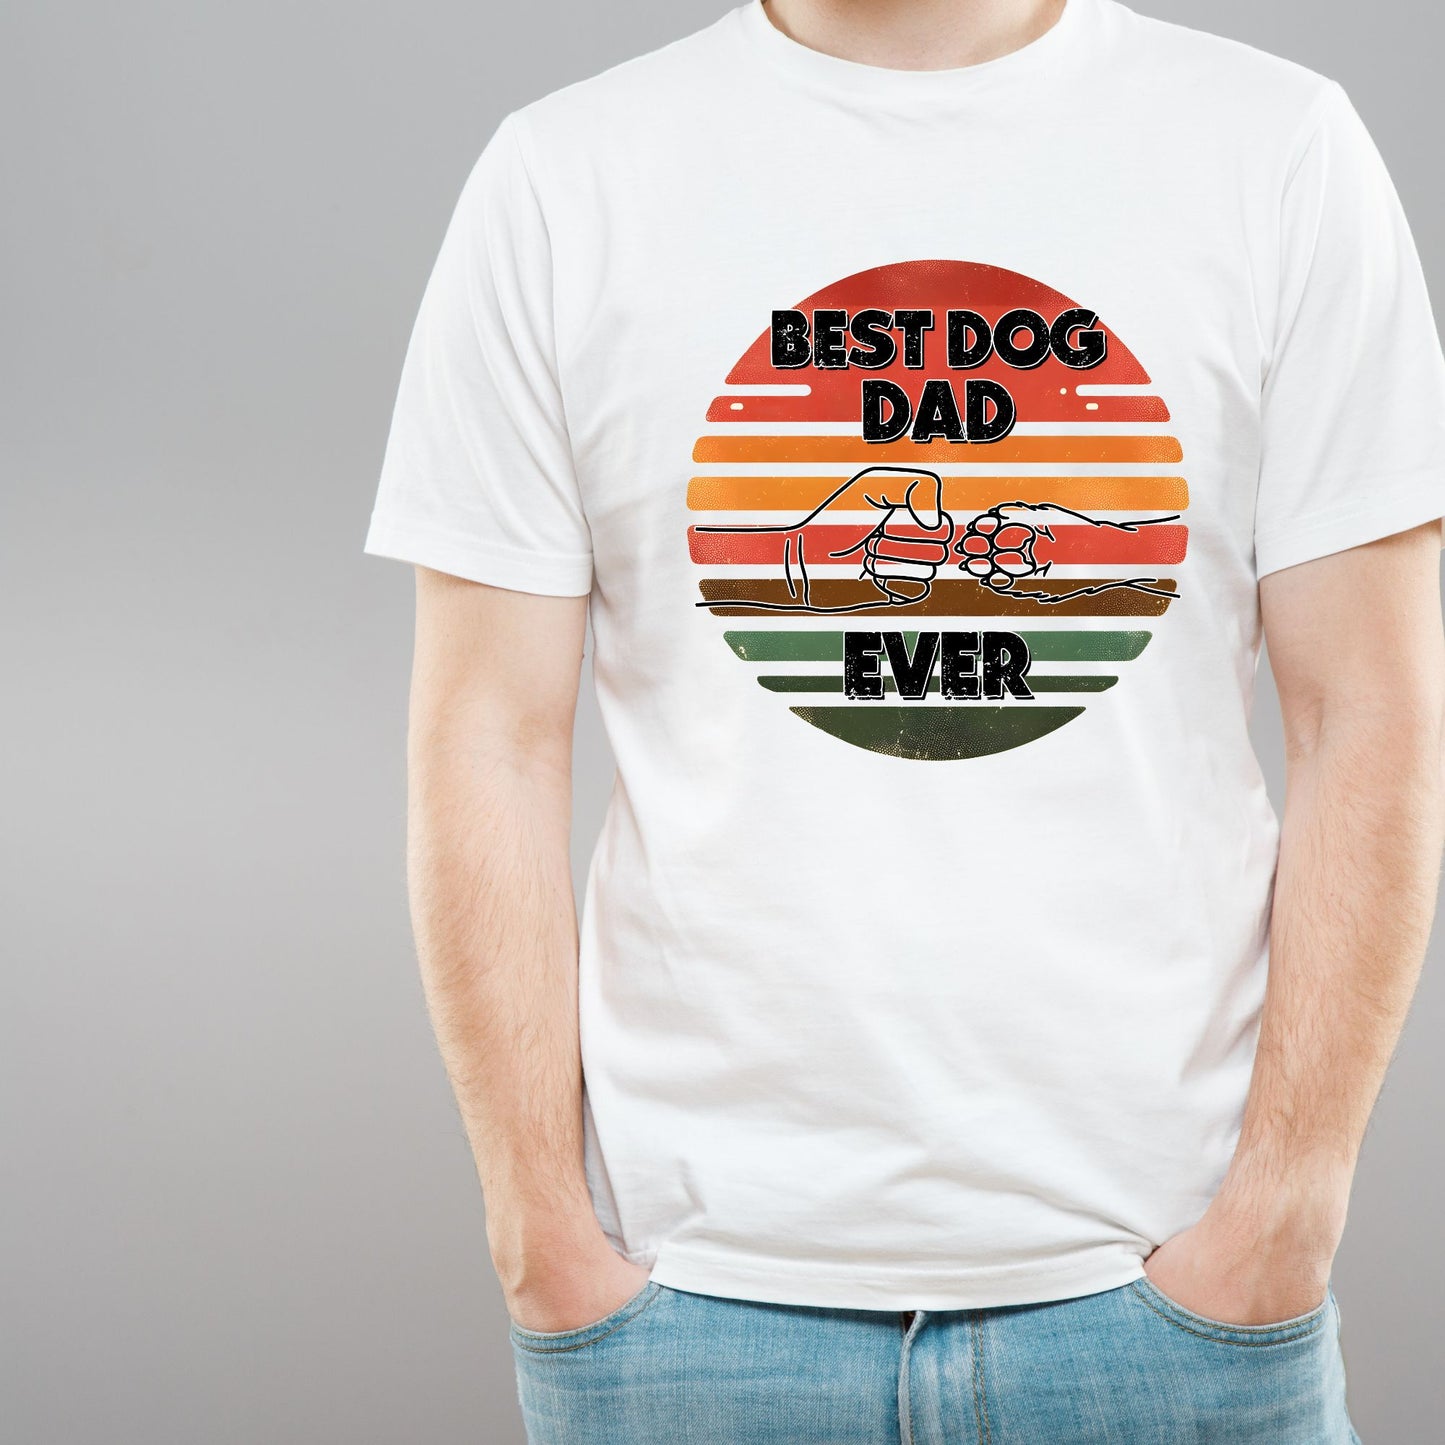 Best Dog Dad Ever (A) - Short Sleeved T-Shirts for Father's Day